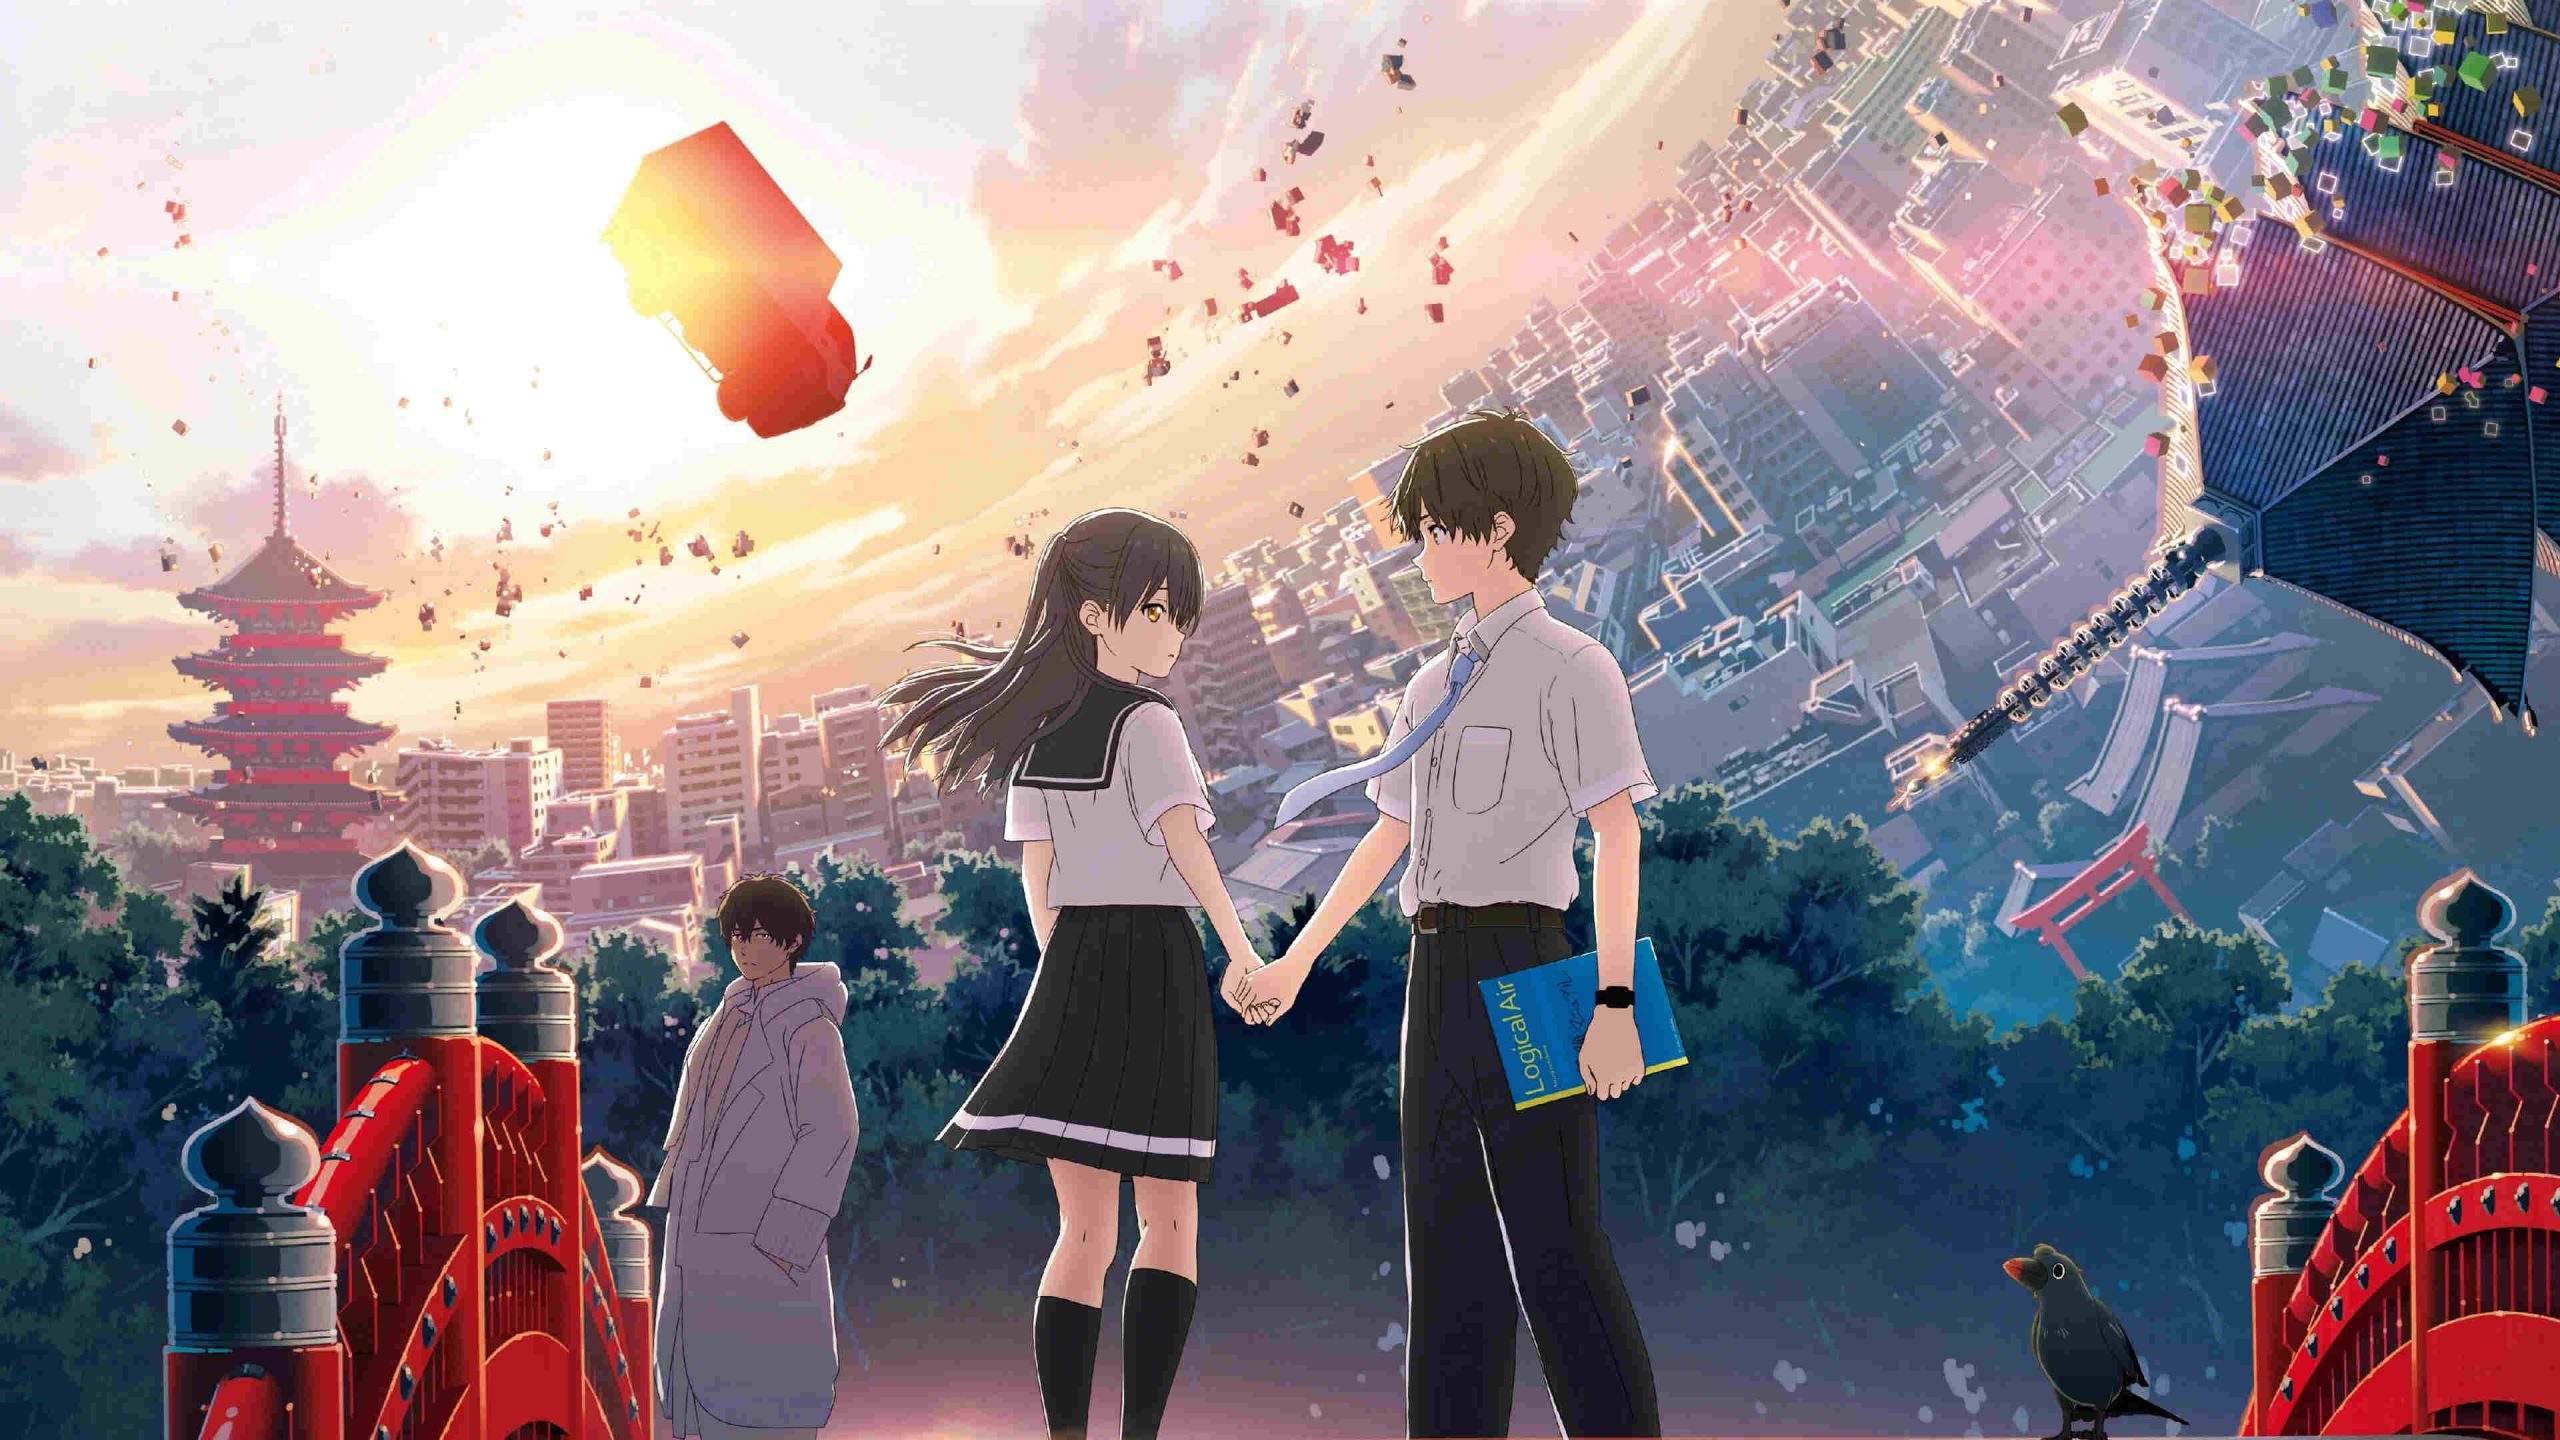 10 Best Anime Movies to Watch With Friends in 2022